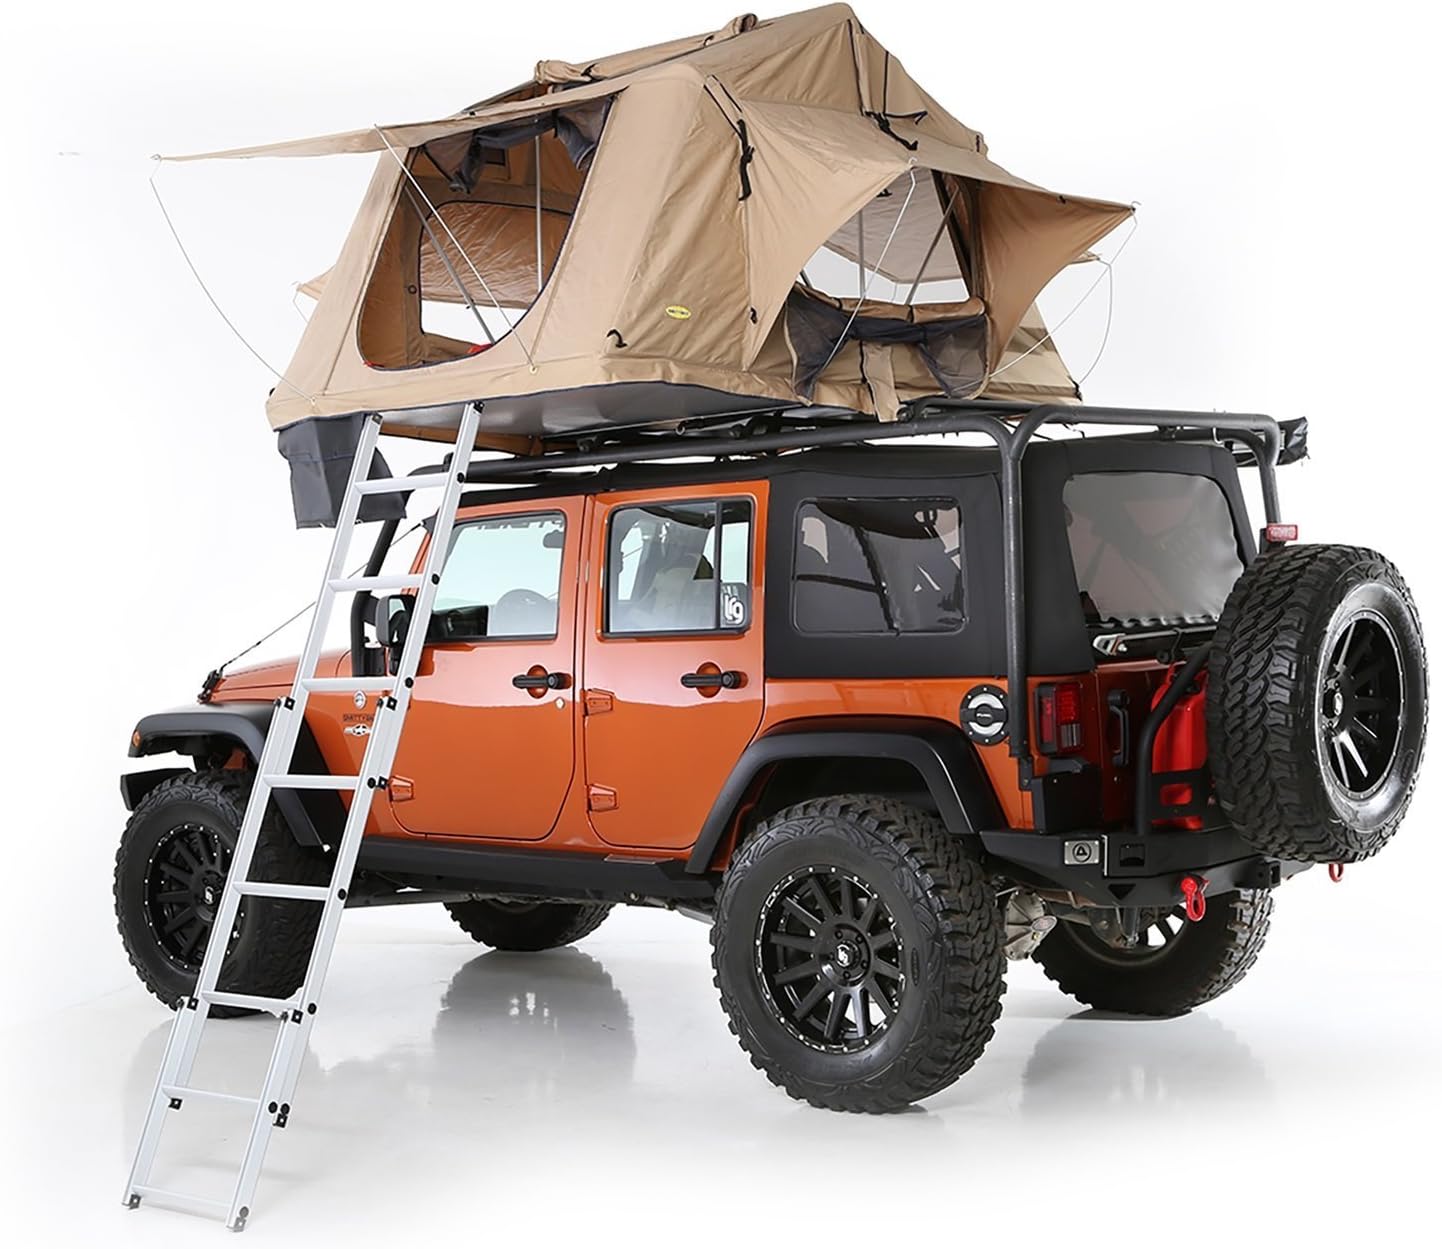 Smittybilt Roof Tent 4 Season For Camping